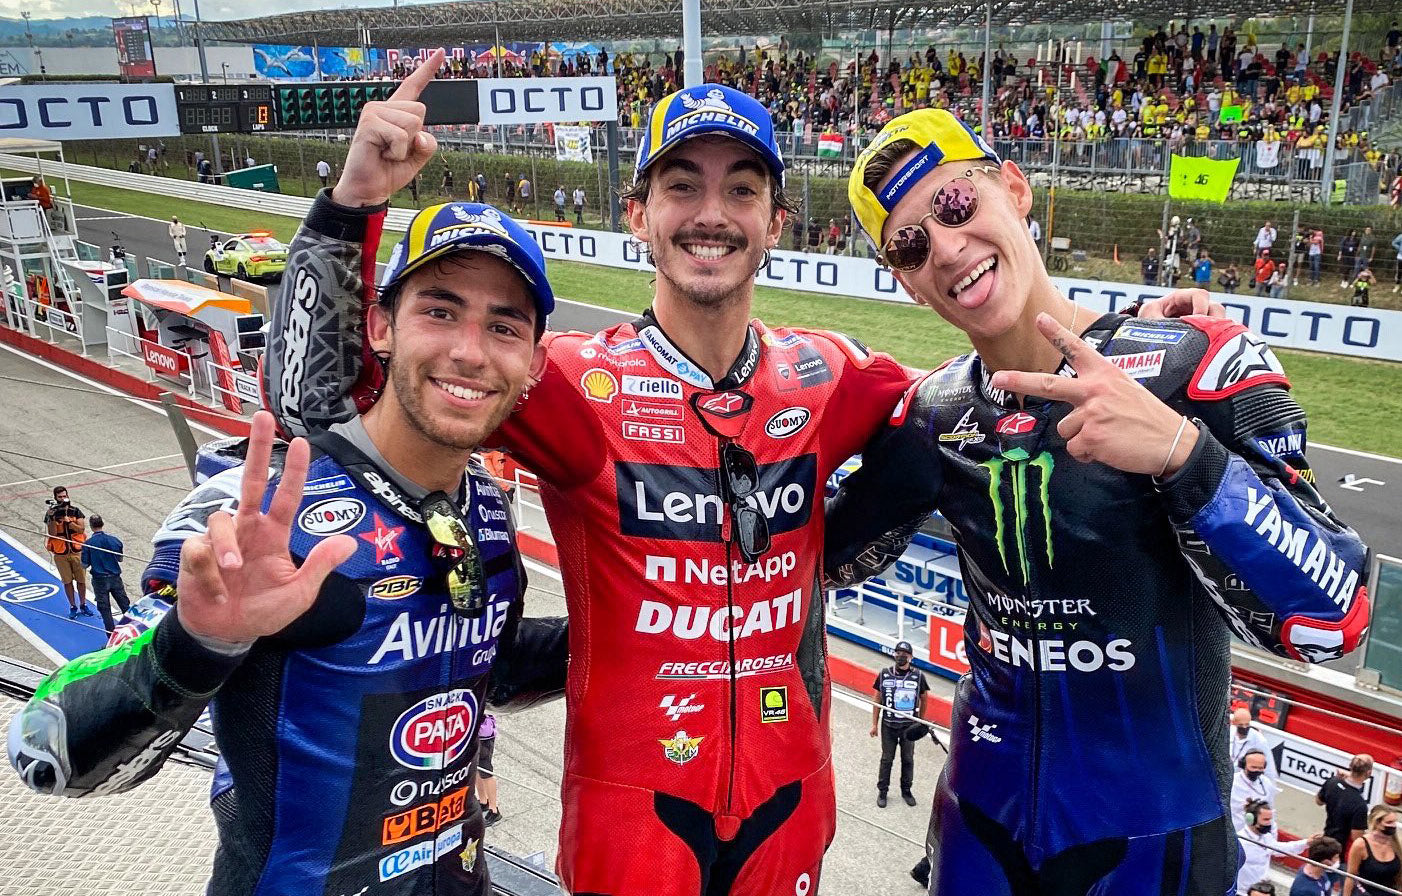 ALPINESTARS PODIUM LOCK-OUT AS PECCO BAGNAIA STORMS TO VICTORY AT MISANO, ITALY, TO SECURE HIS SECOND CONSECUTIVE VICTORY IN MOTOGP